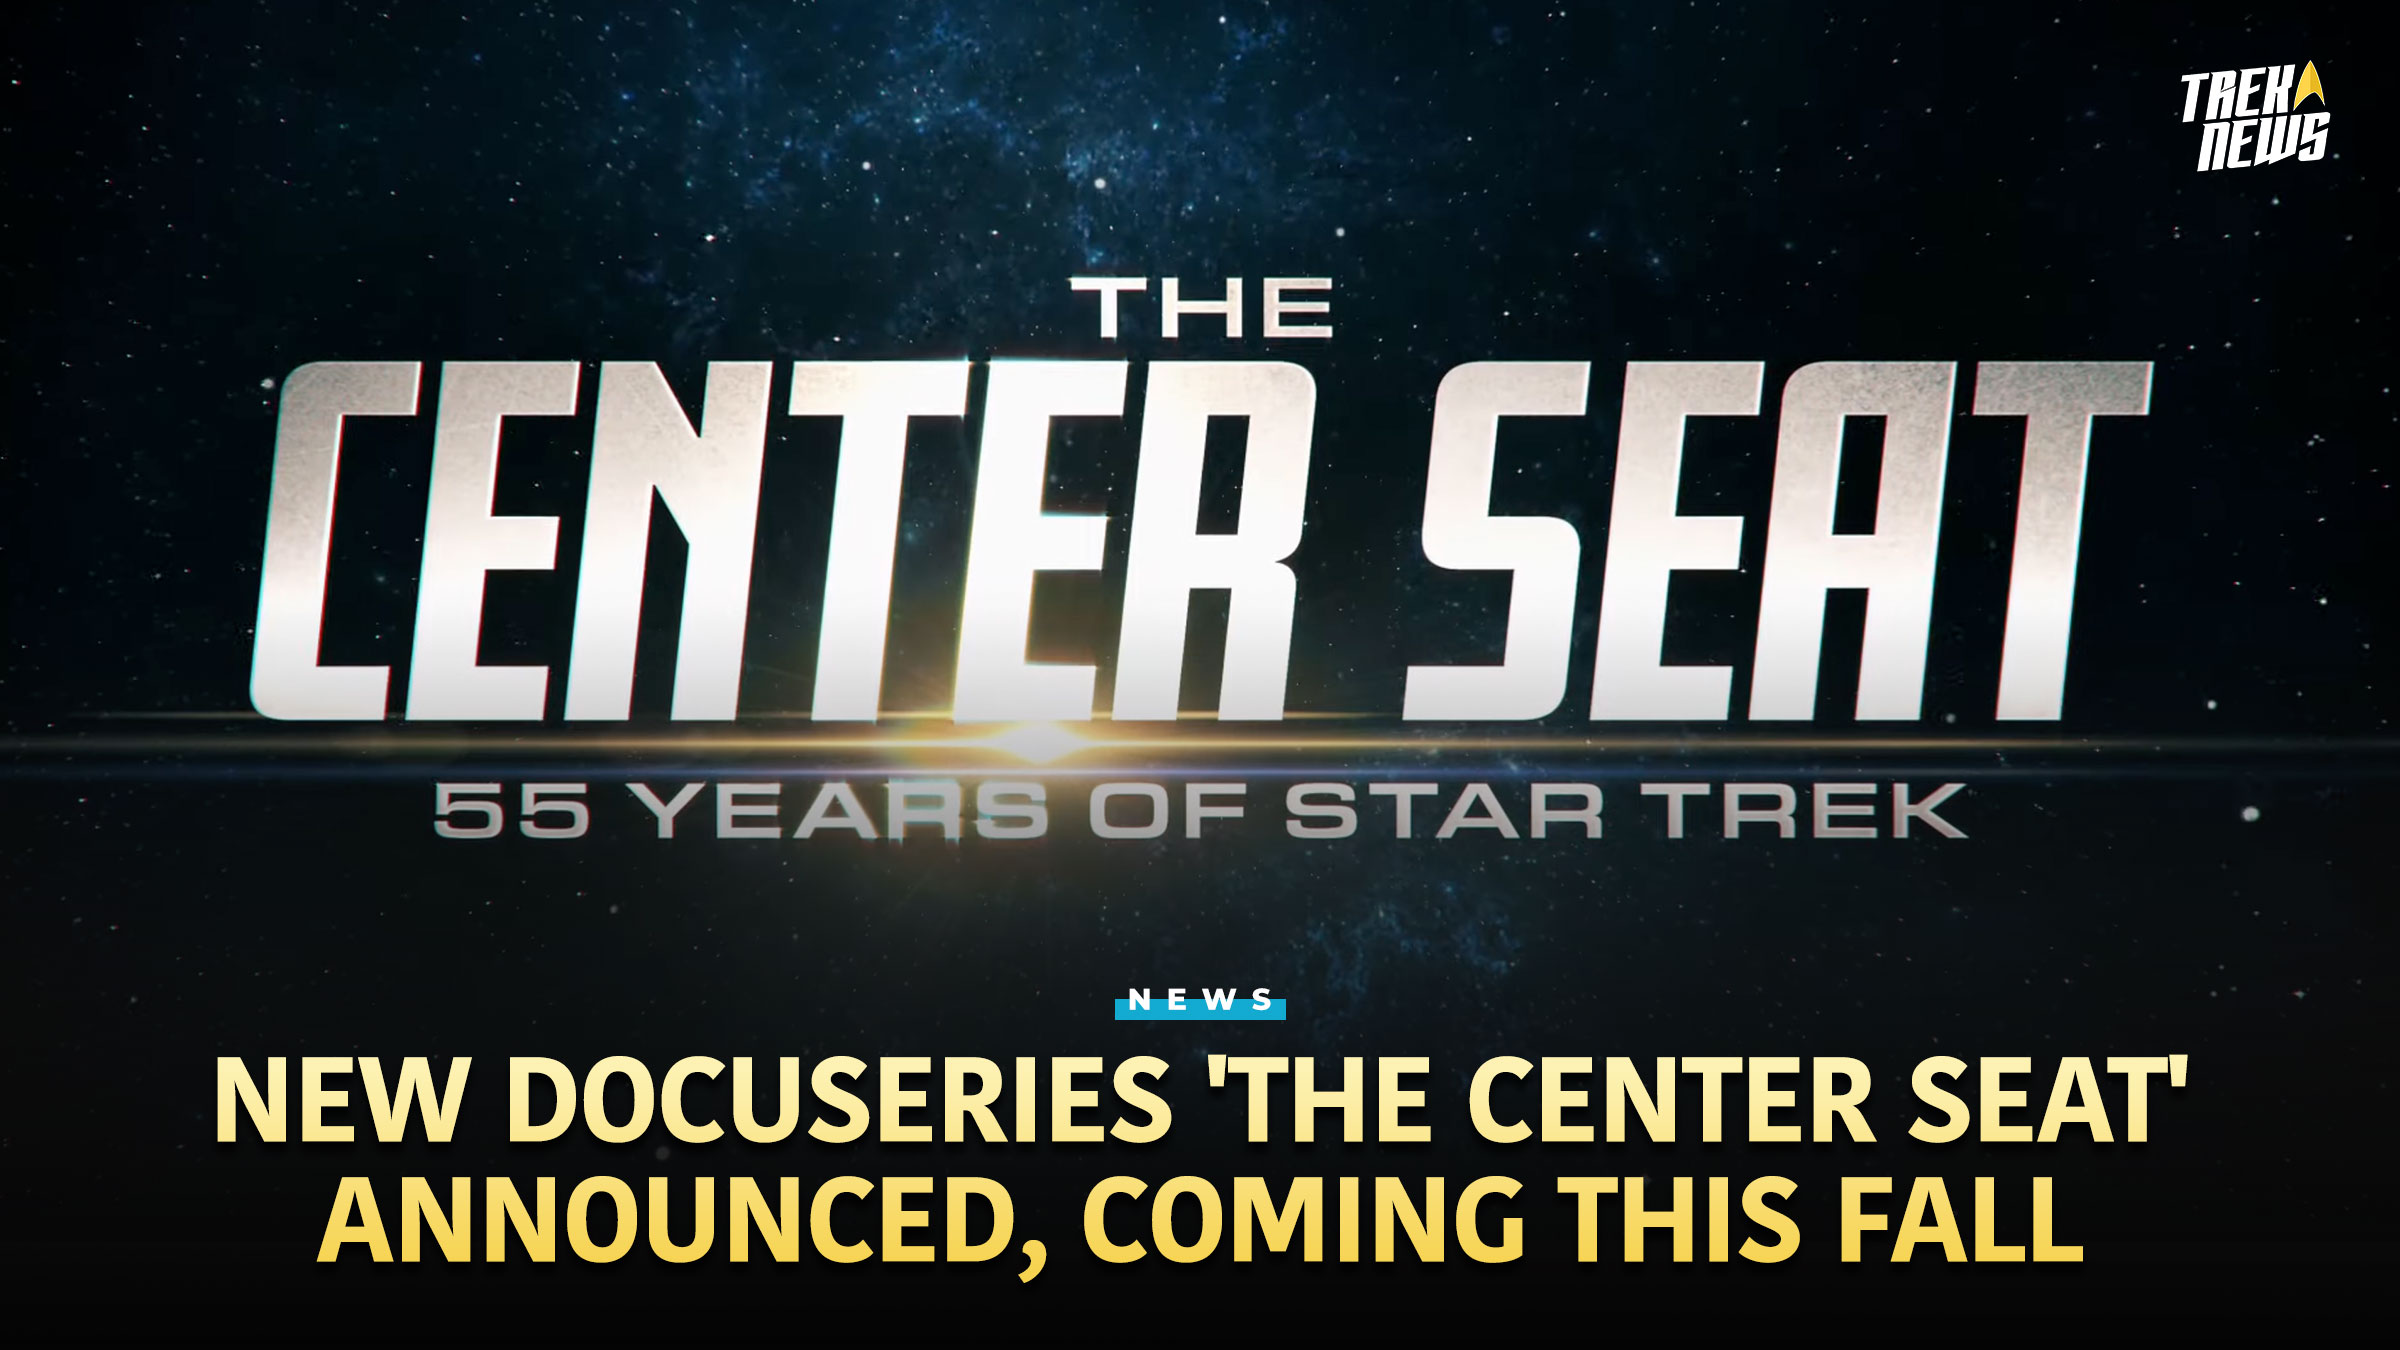 New Star Trek Docuseries ‘The Center Seat’ Announced, Coming This Fall